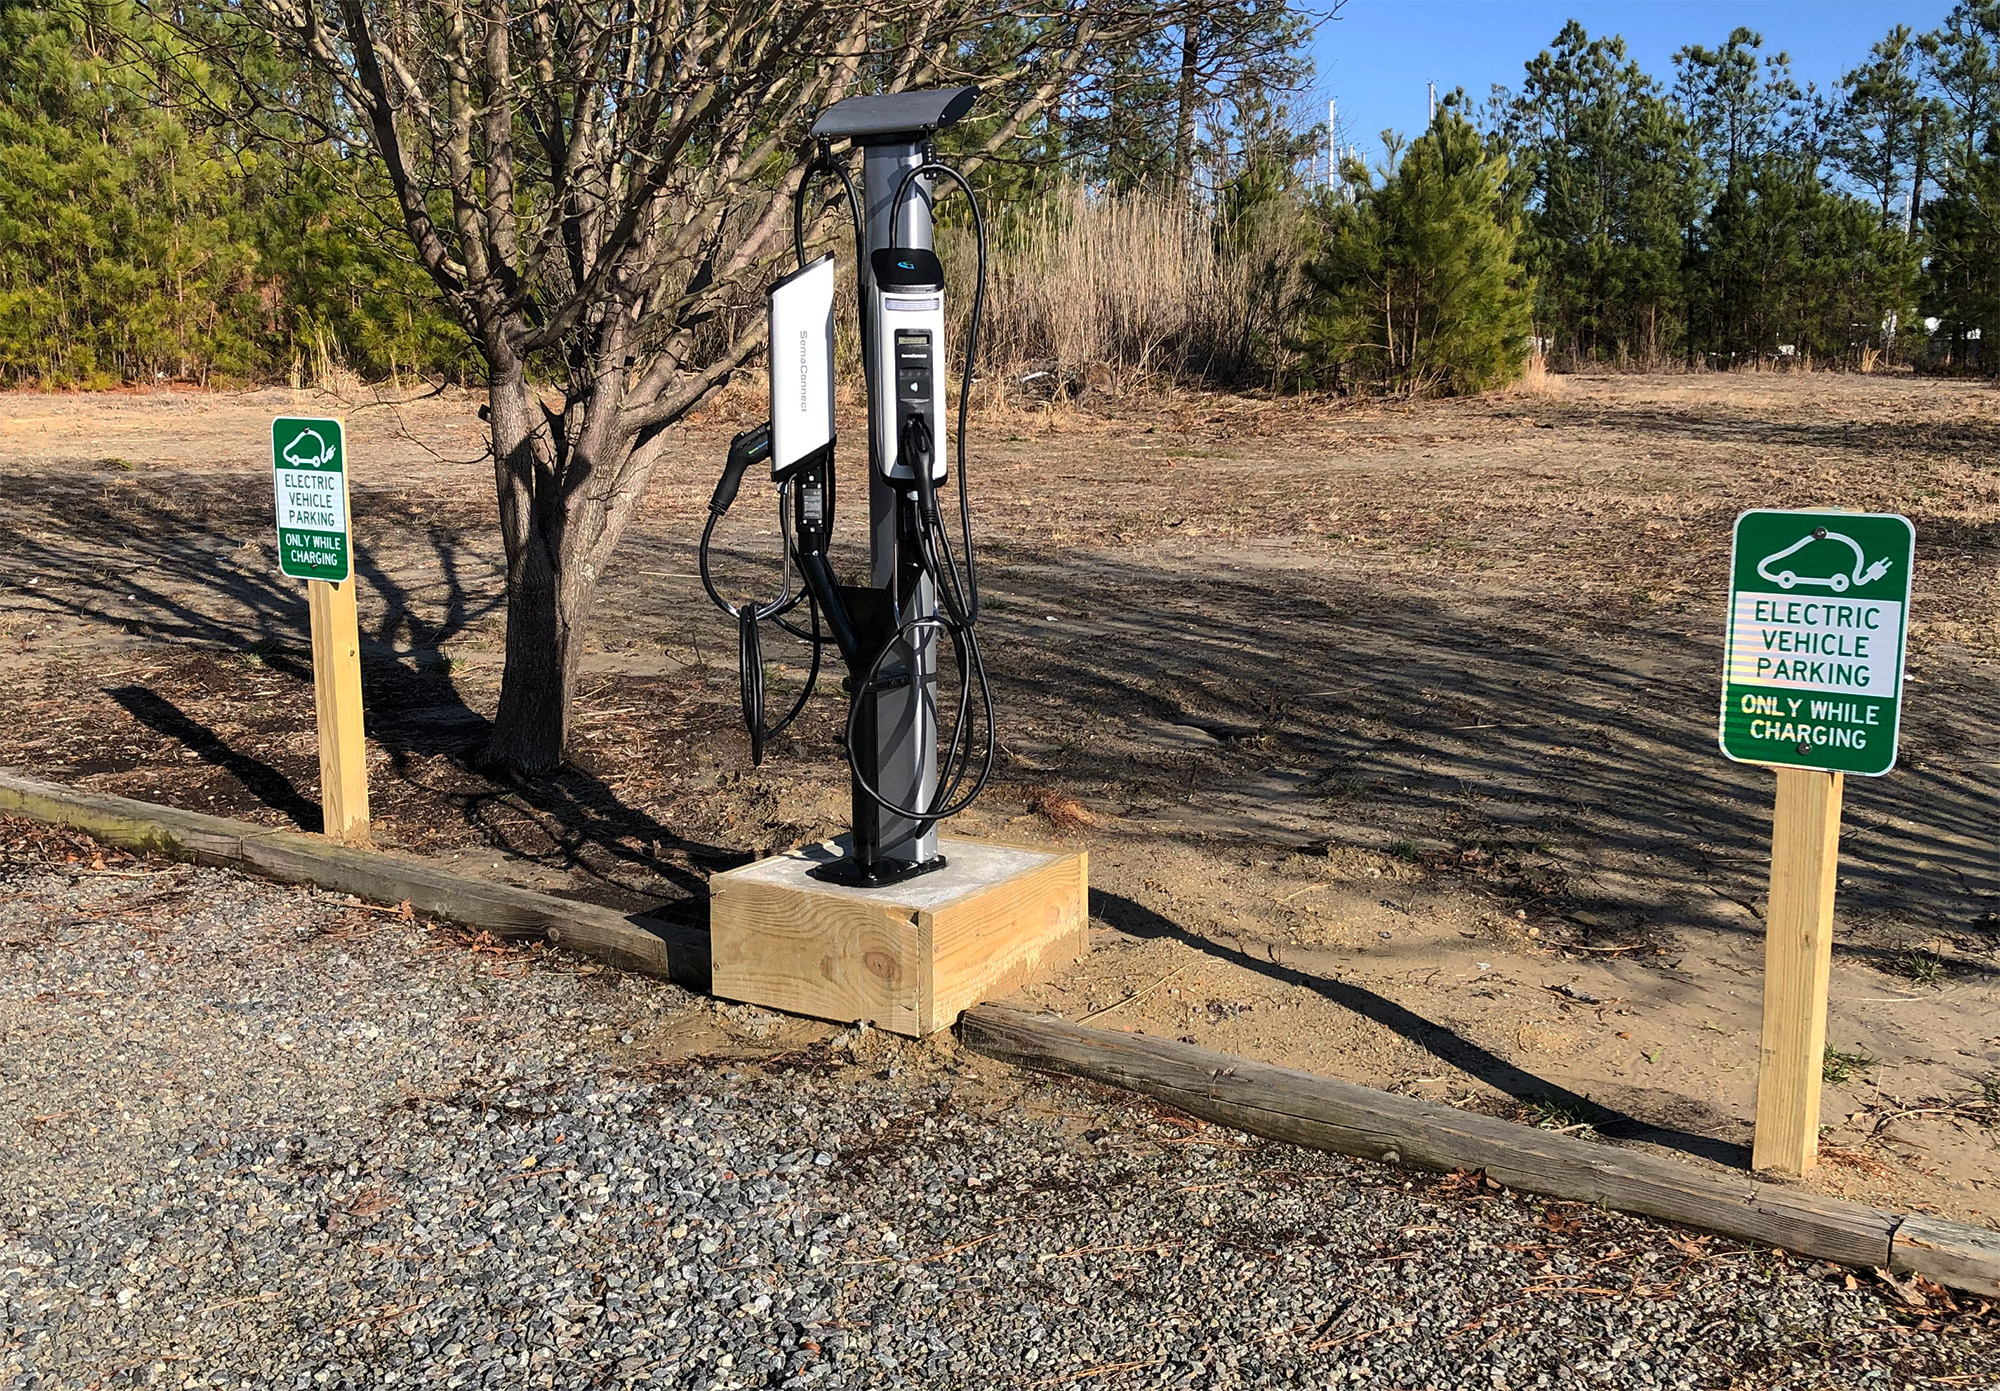 The two new SemaConnect charging stations at the Regatta Point Yachting Center are open to the public and ready to charge.